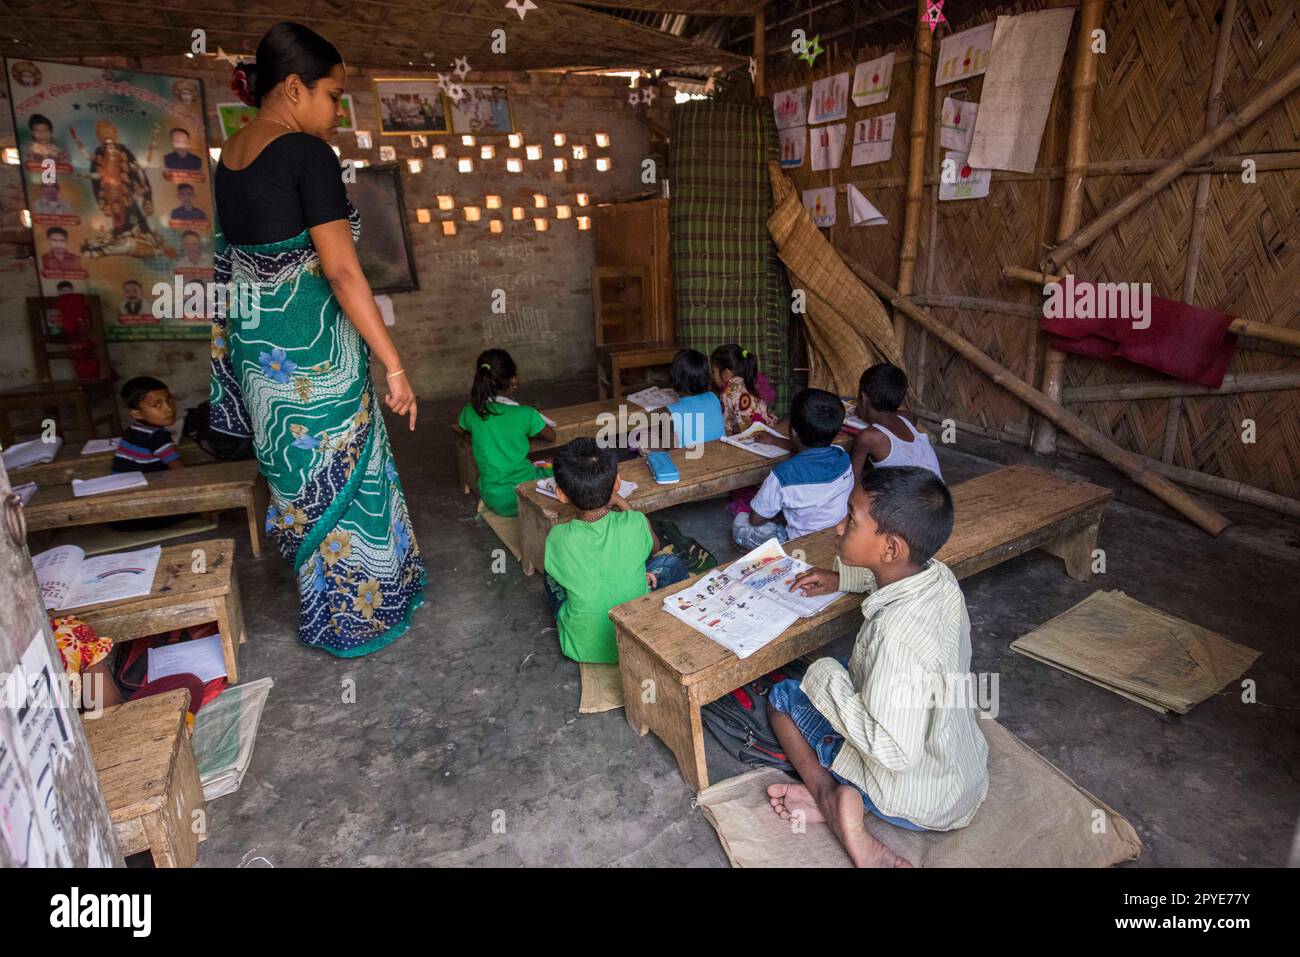 Bangladesh, Khulna, Sonadanga. Children from the Dalit caste attend school in Bangladesh. March 19, 2017. Editorial use only. Stock Photo